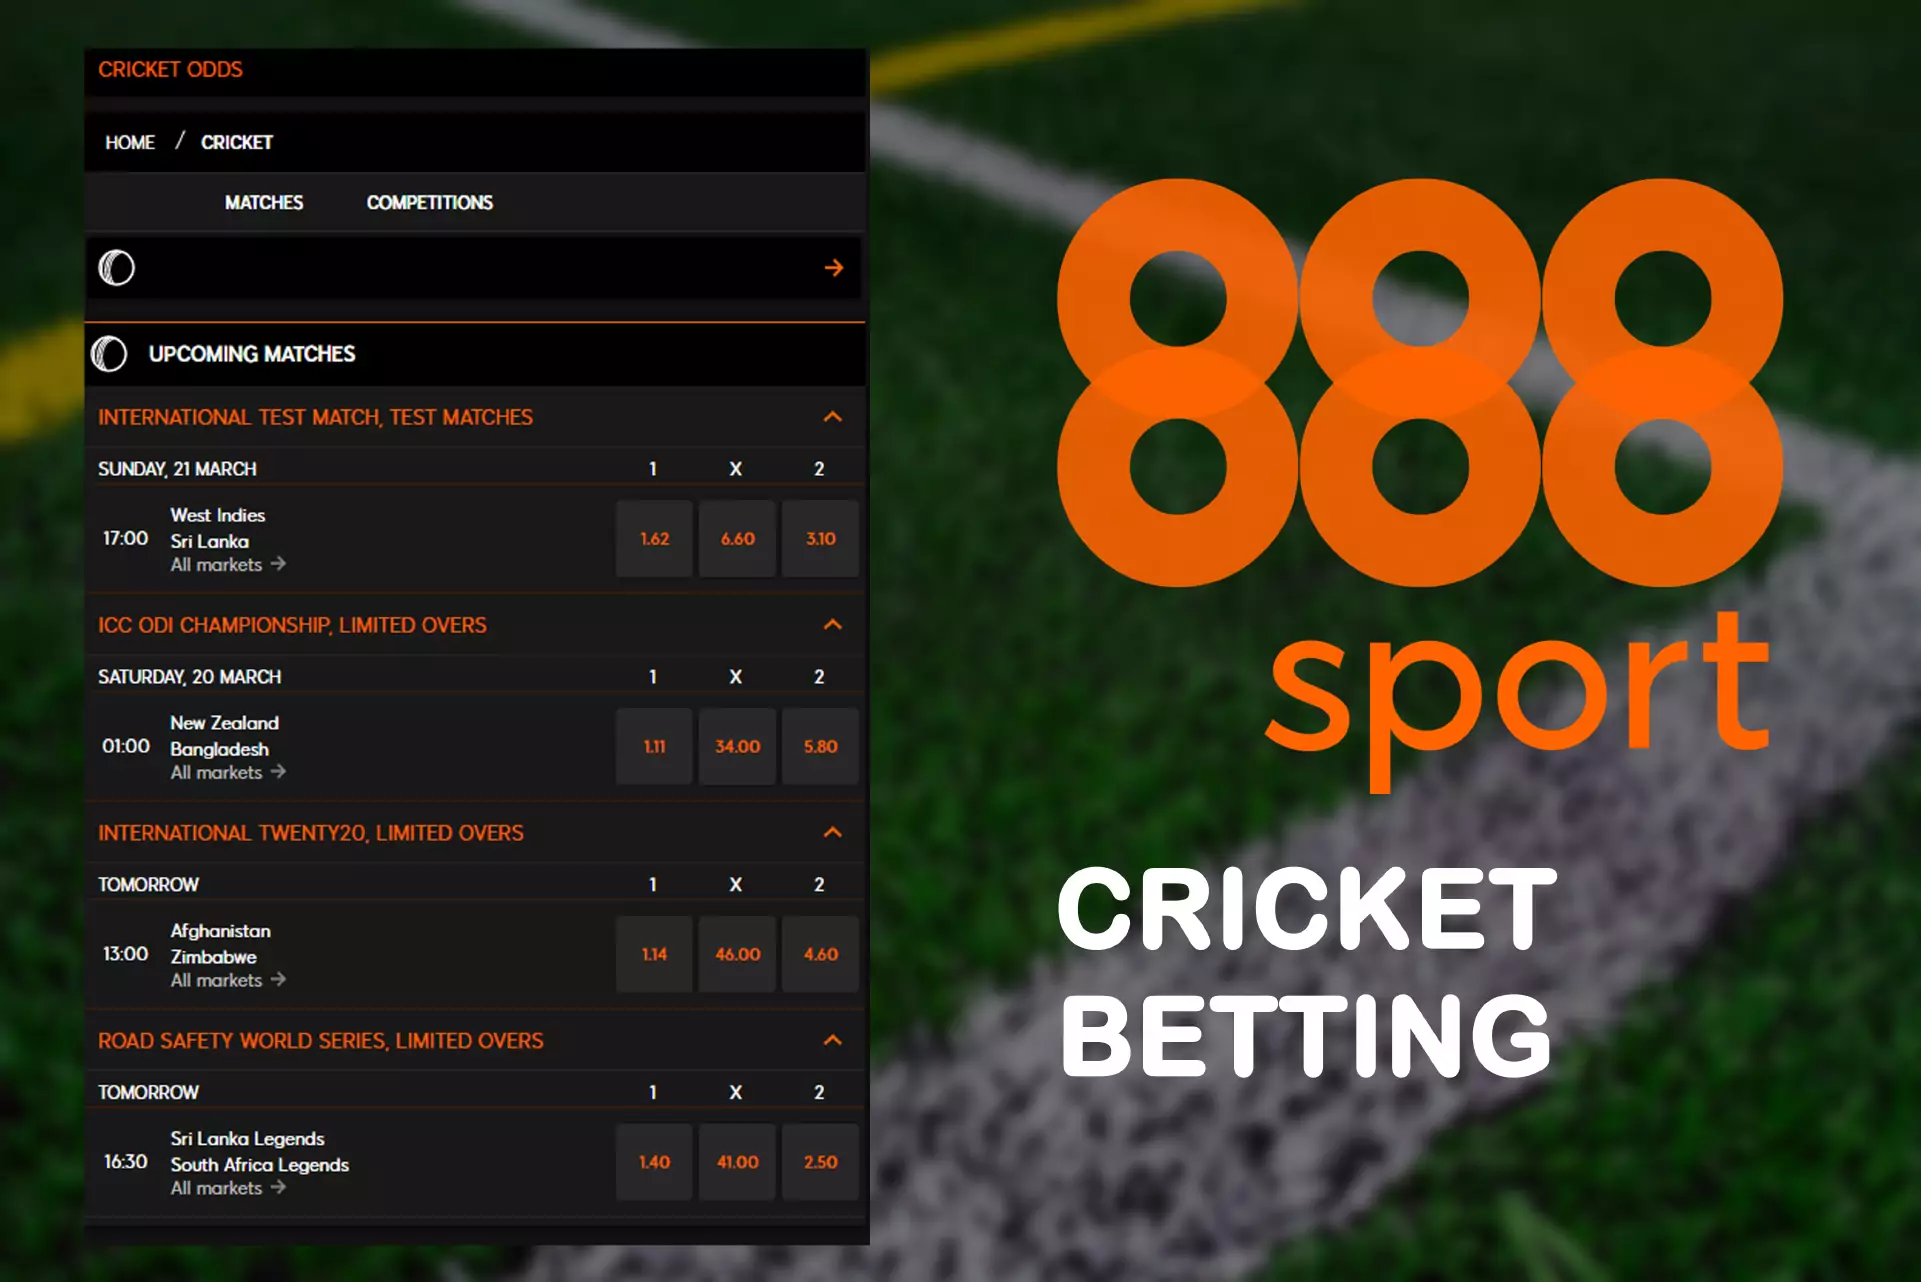 Cricket fans can place bets in the special section of the app.